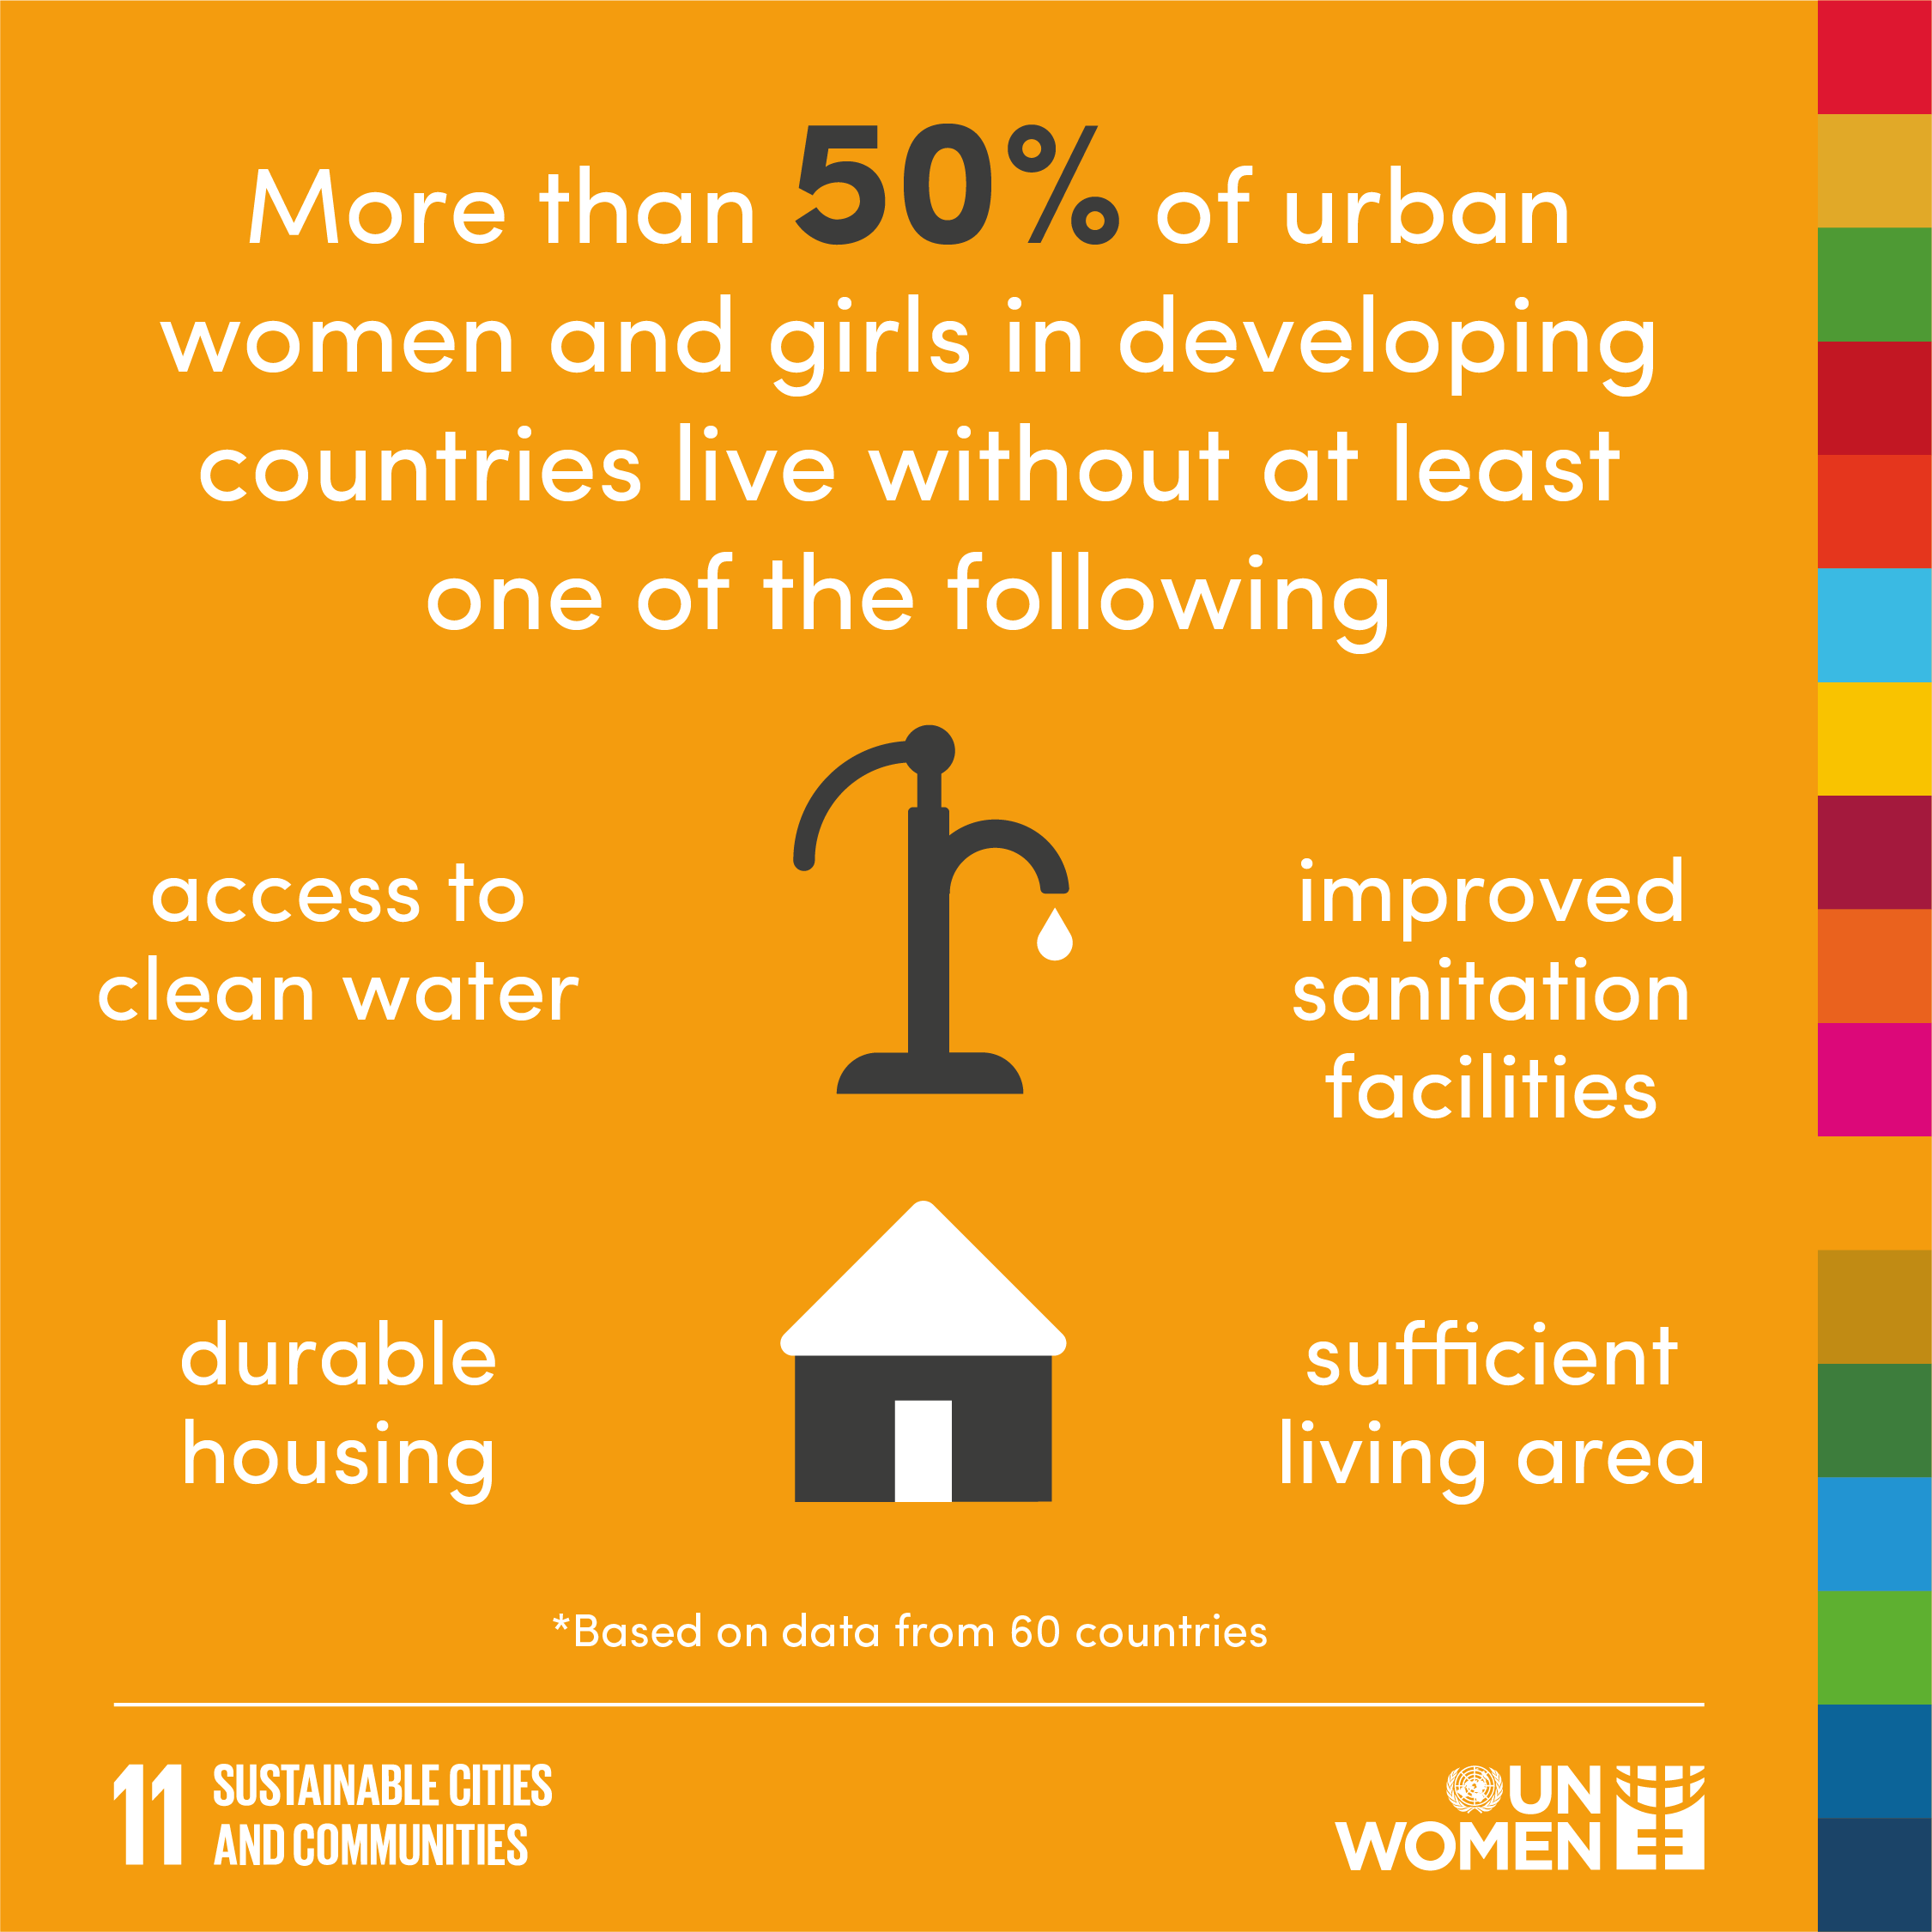 More than 50% of urban women and girls in developing countries live without at least one of the following: access to clean water; improved sanitation facilities; durable housing; sufficient living area